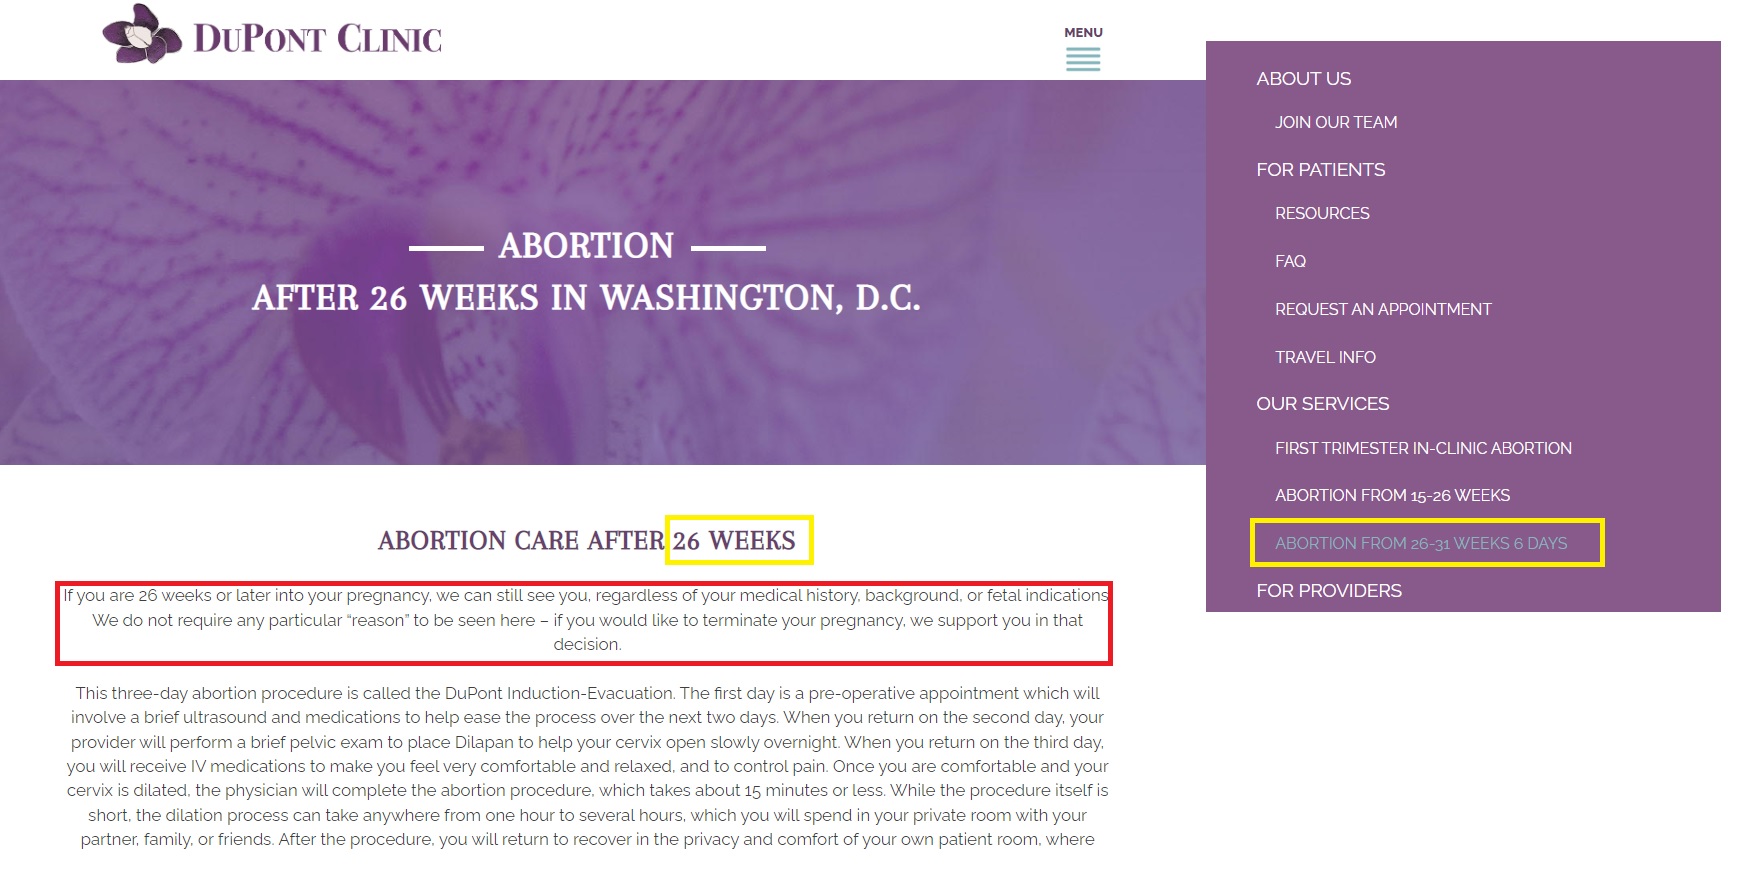 Image: Dupont Clinic late abortions 26 to 31 weeks for any reason 05122023